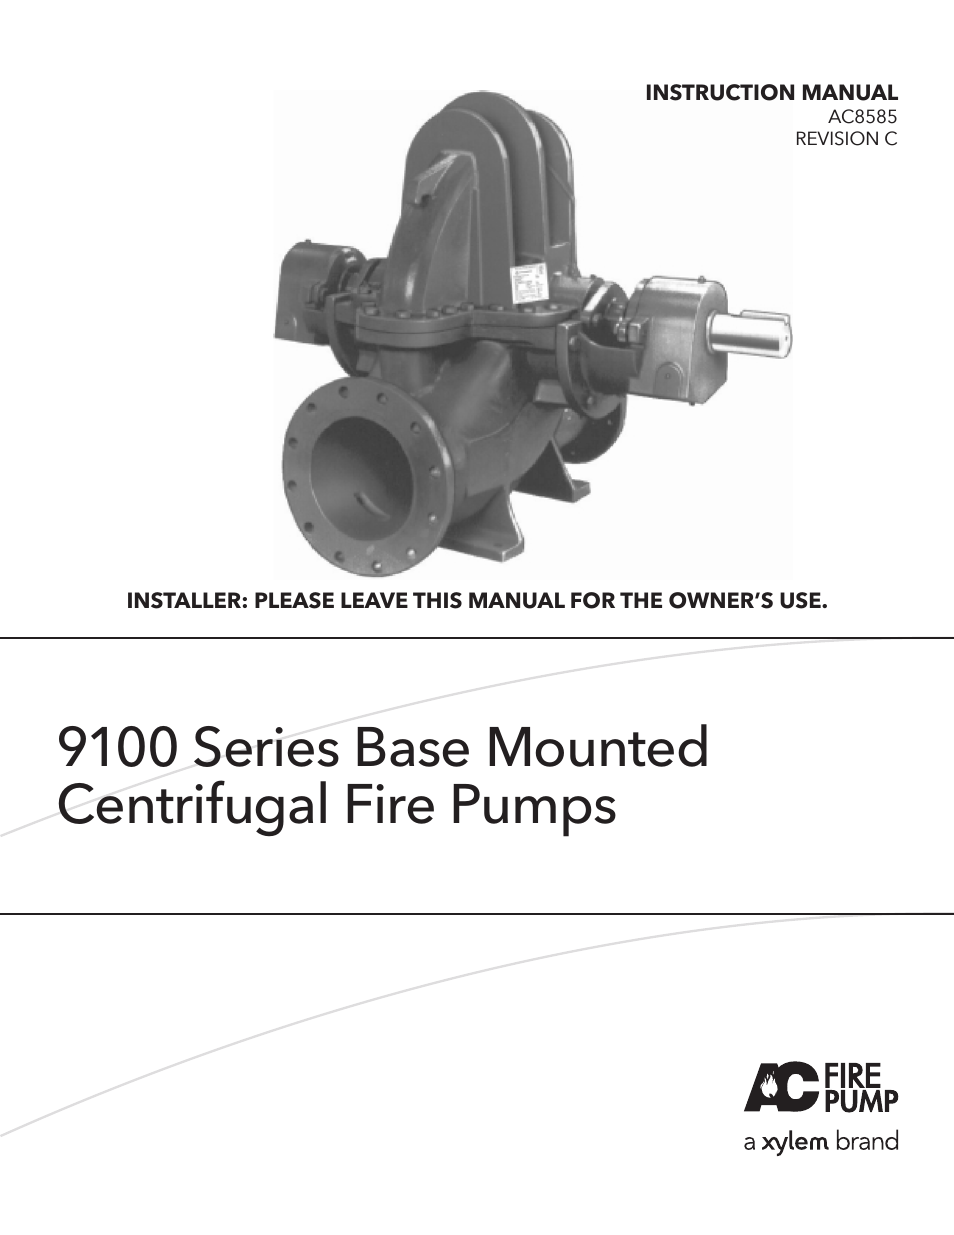 9100 Series Base Mounted Centrifugal Fire Pumps AC8585 REV.C